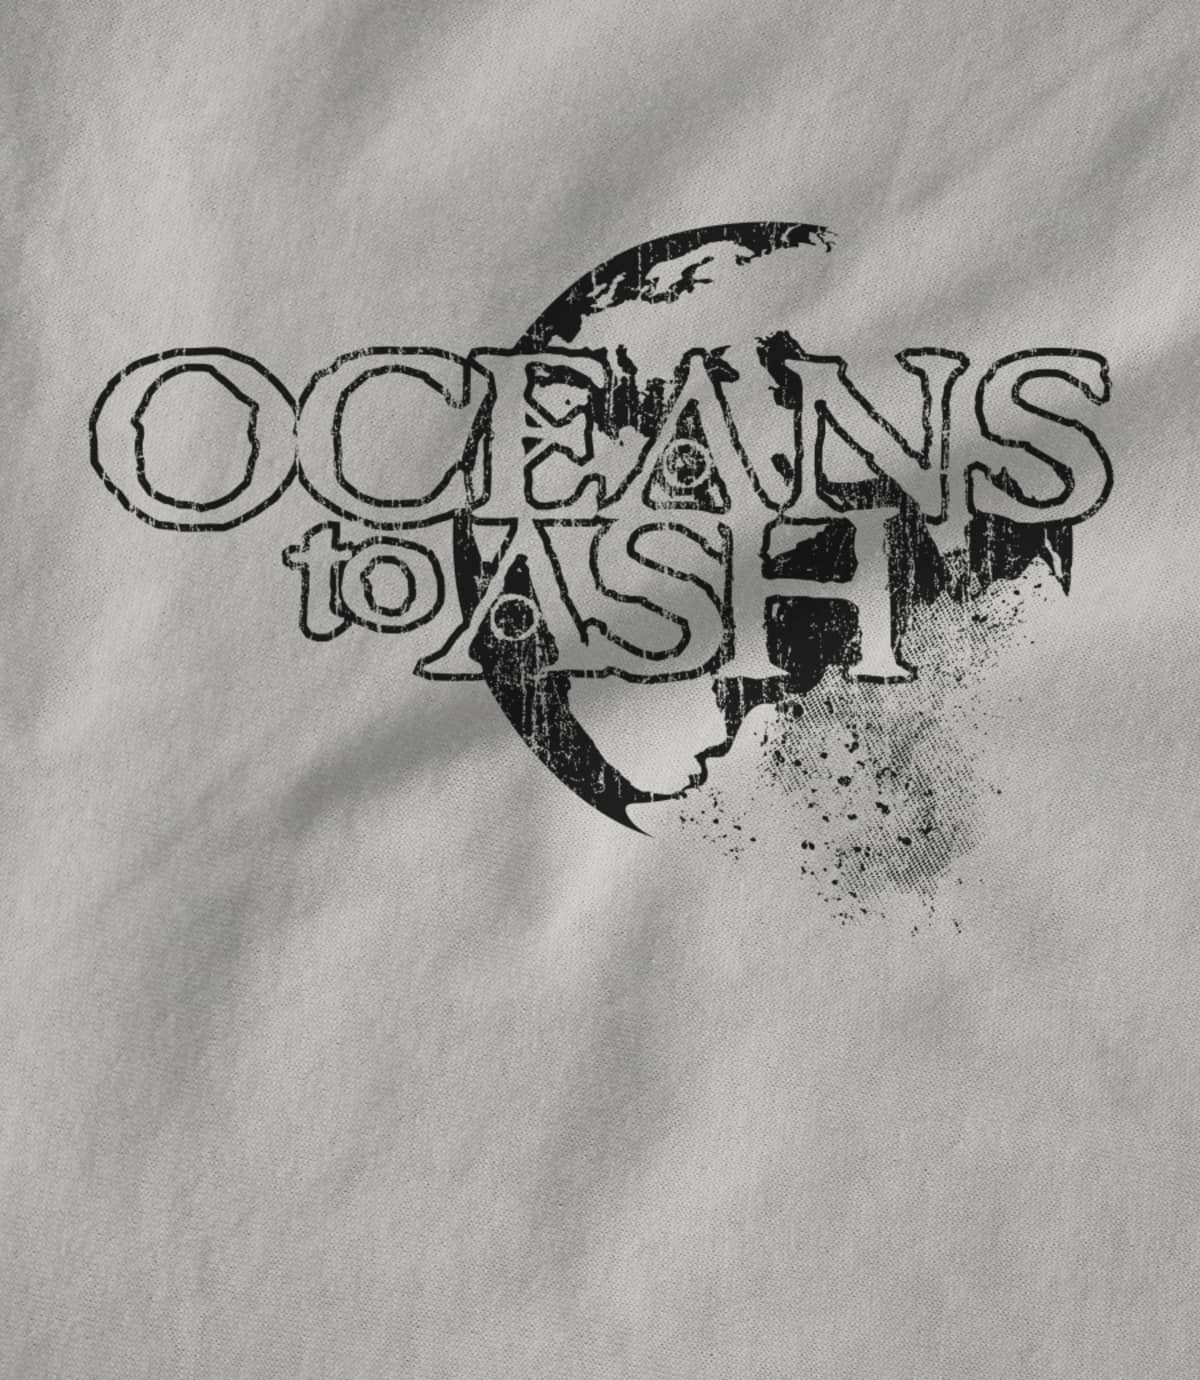 Oceans to Ash